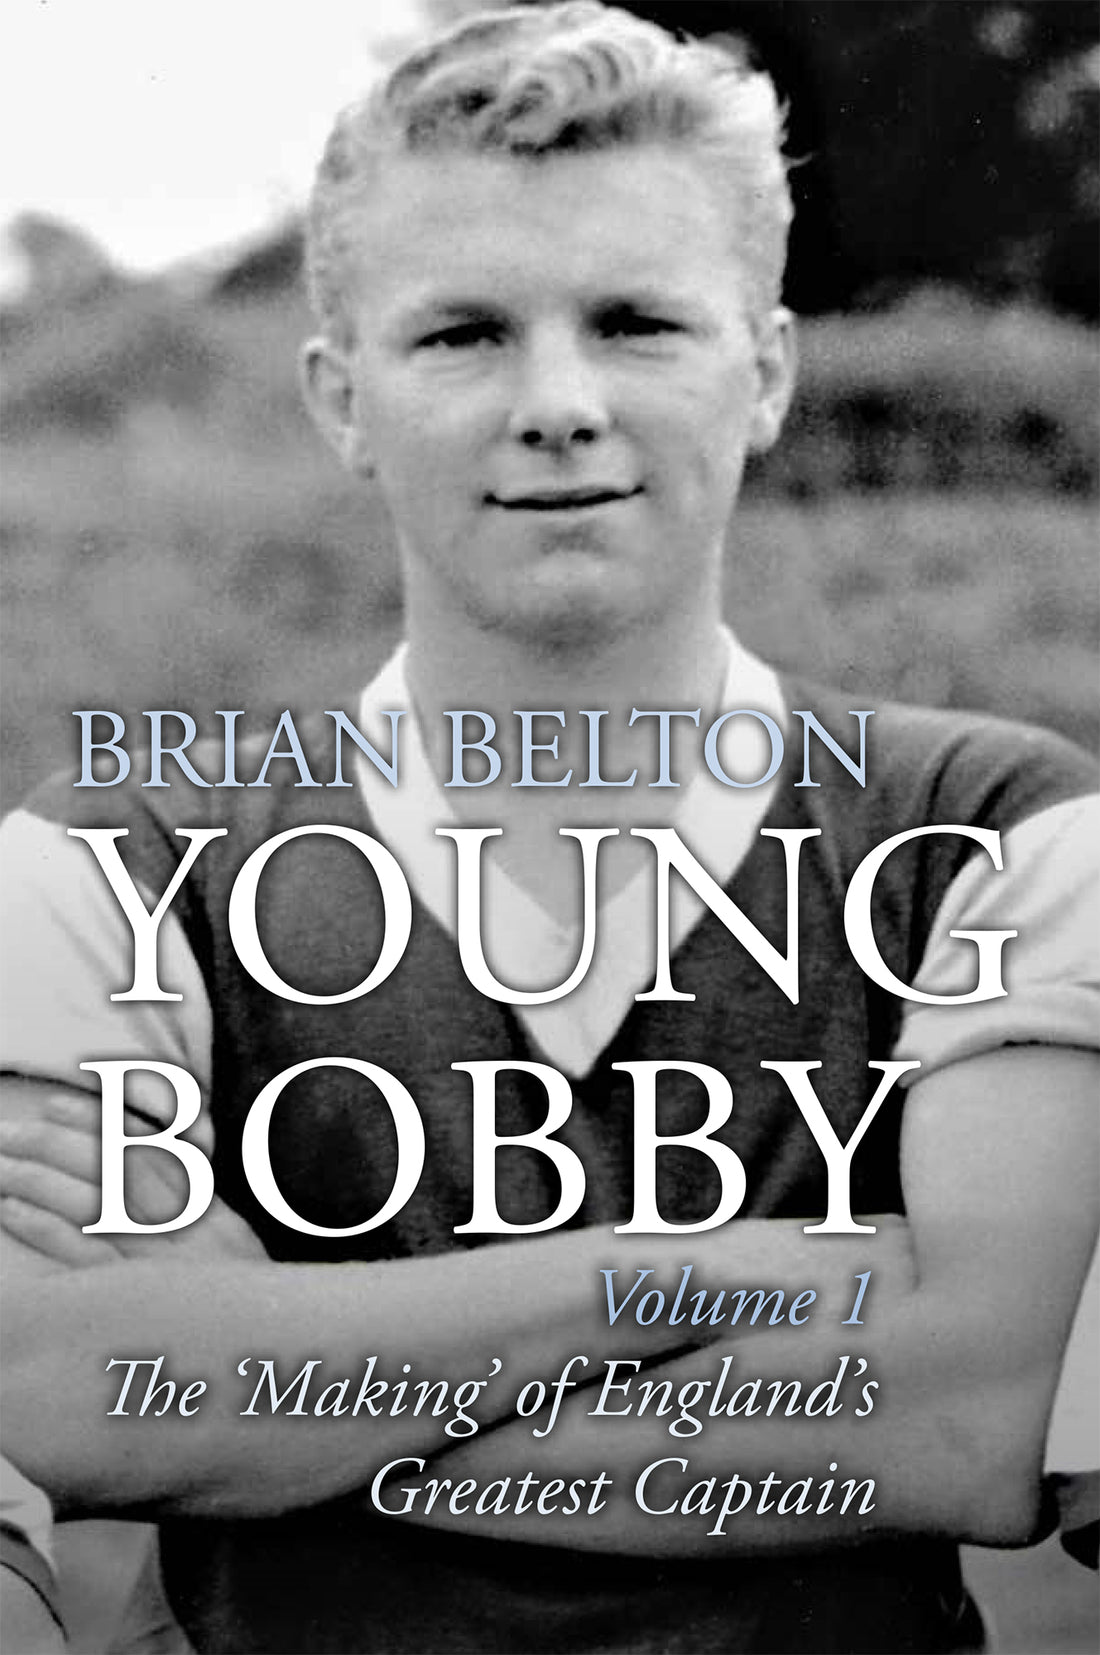 Bobby Moore - "Young Bobby" - by Brian Belton